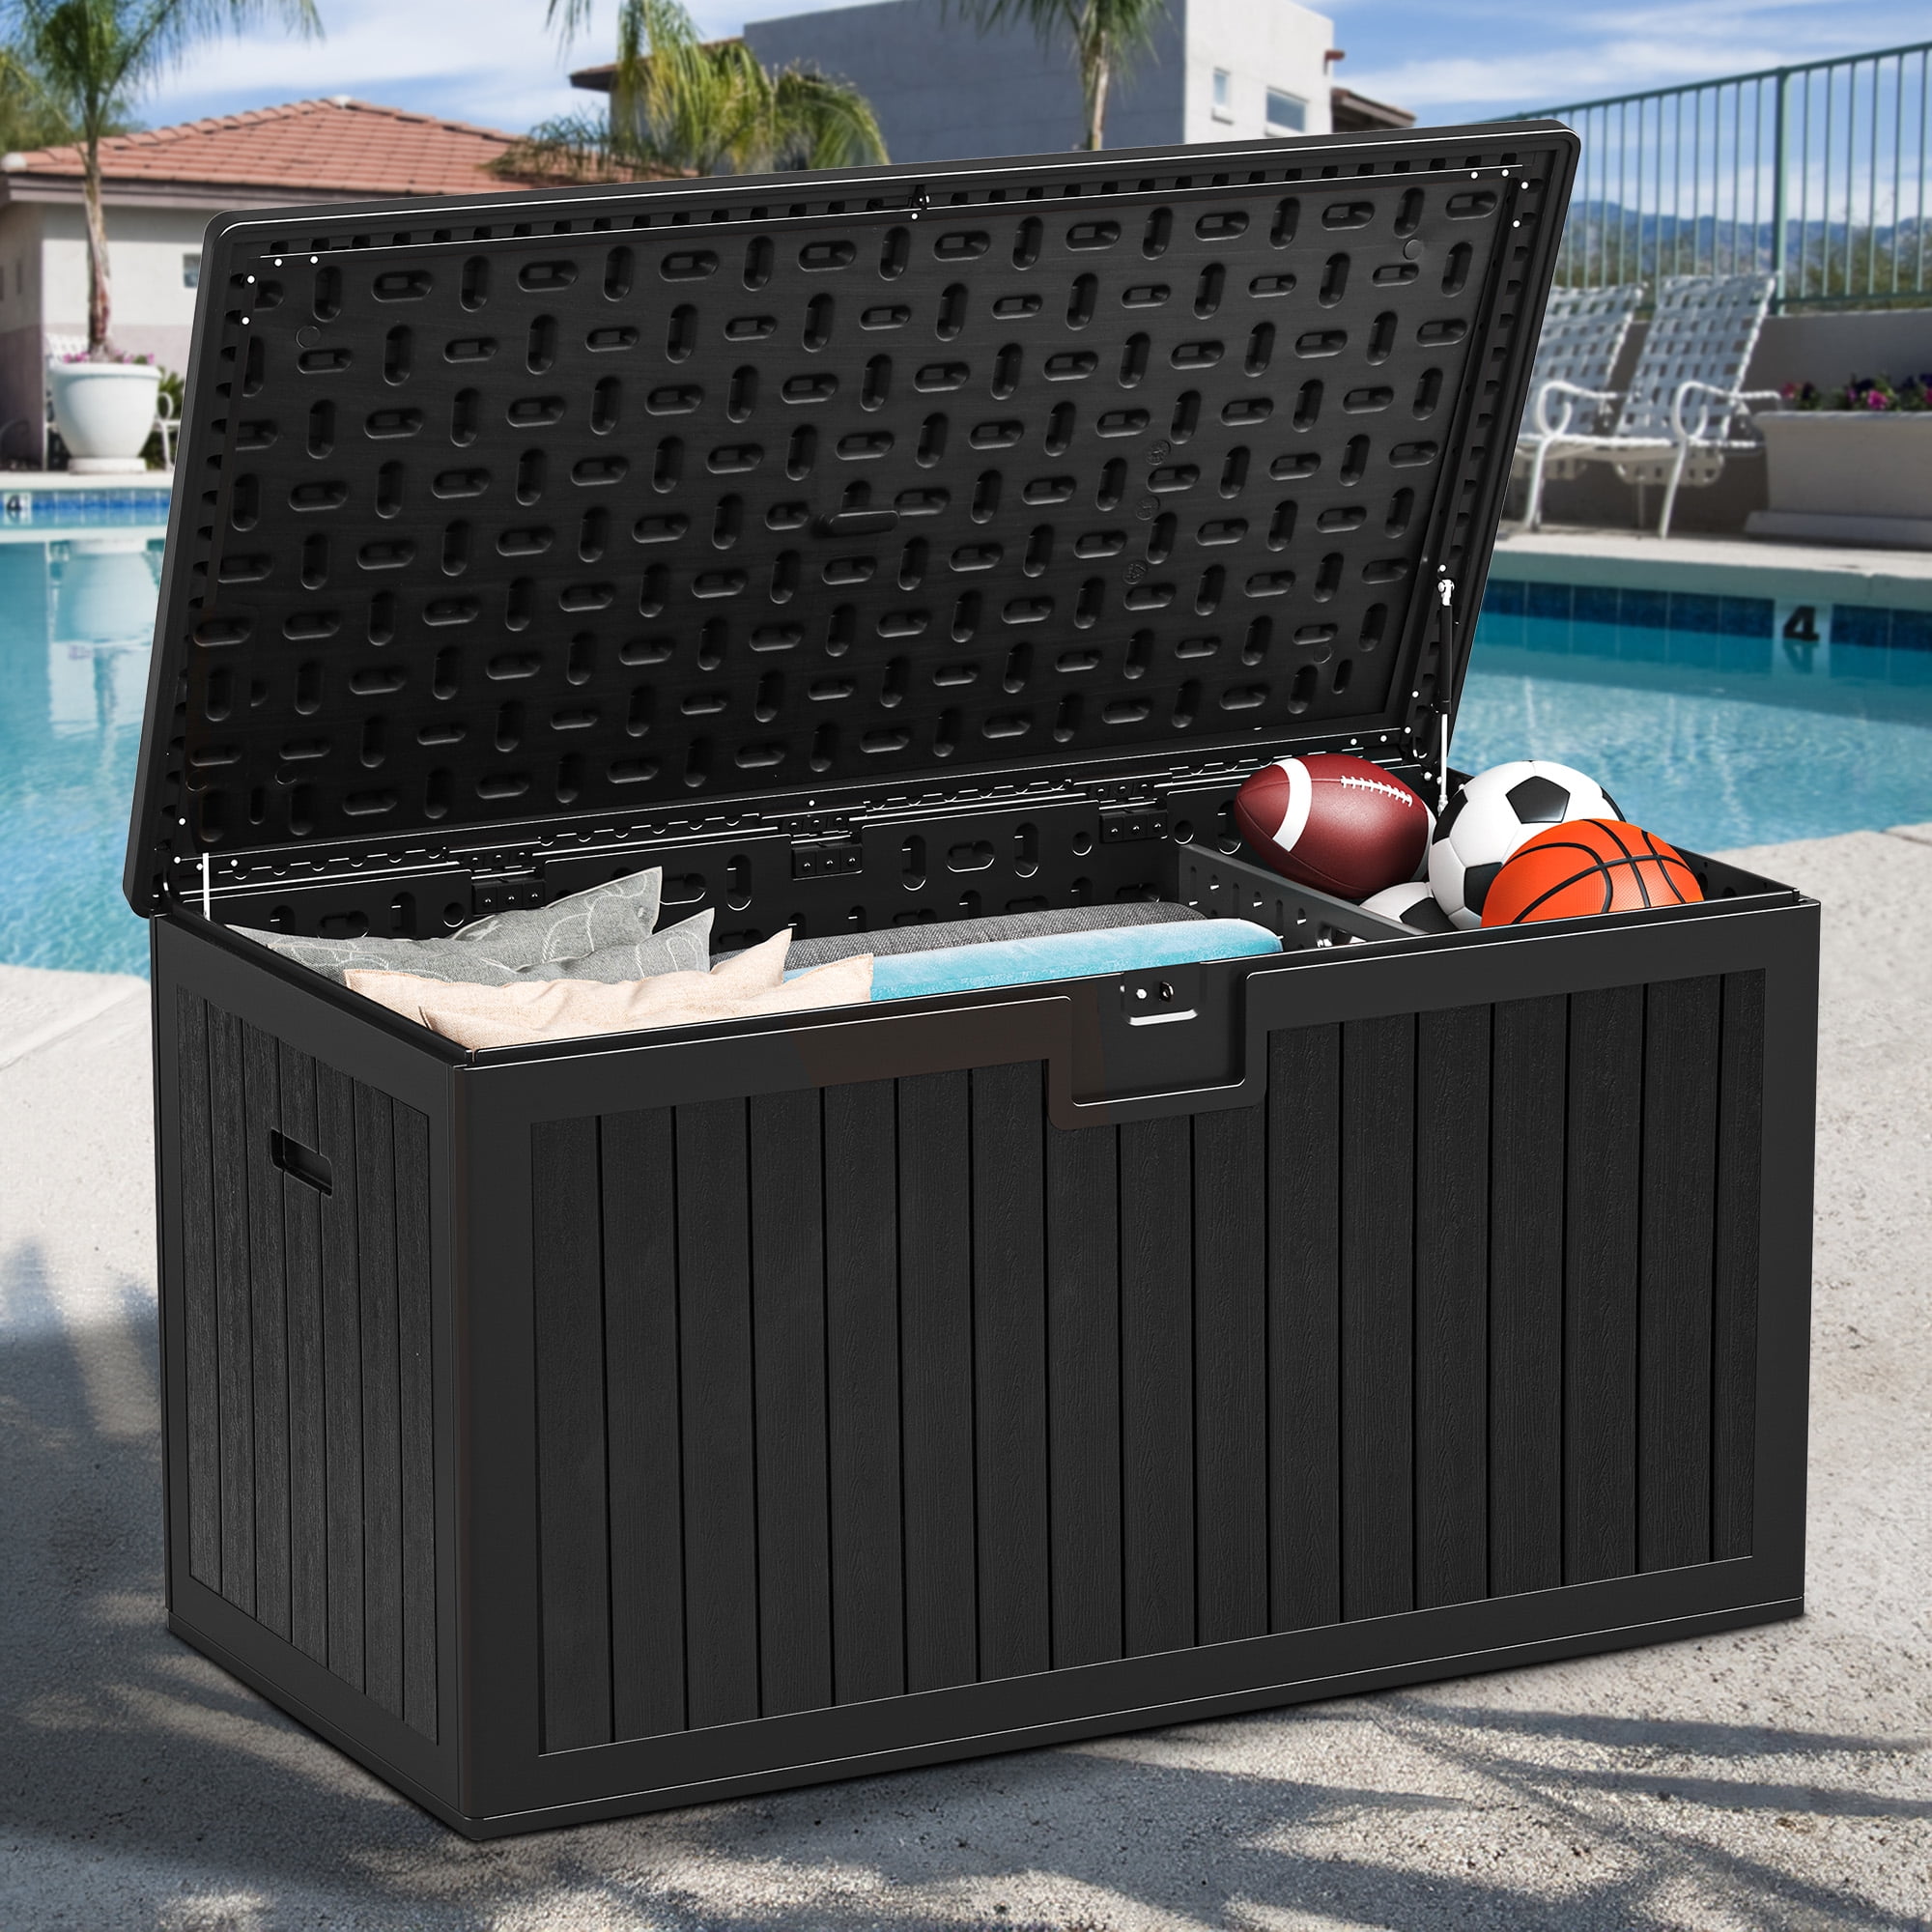 YITAHOME 30 Gallon Deck Box, Outdoor Storage Box for Patio Furniture, Pool  Accessories, Cushions, Garden Tools and Outdoor, Waterproof Resin with